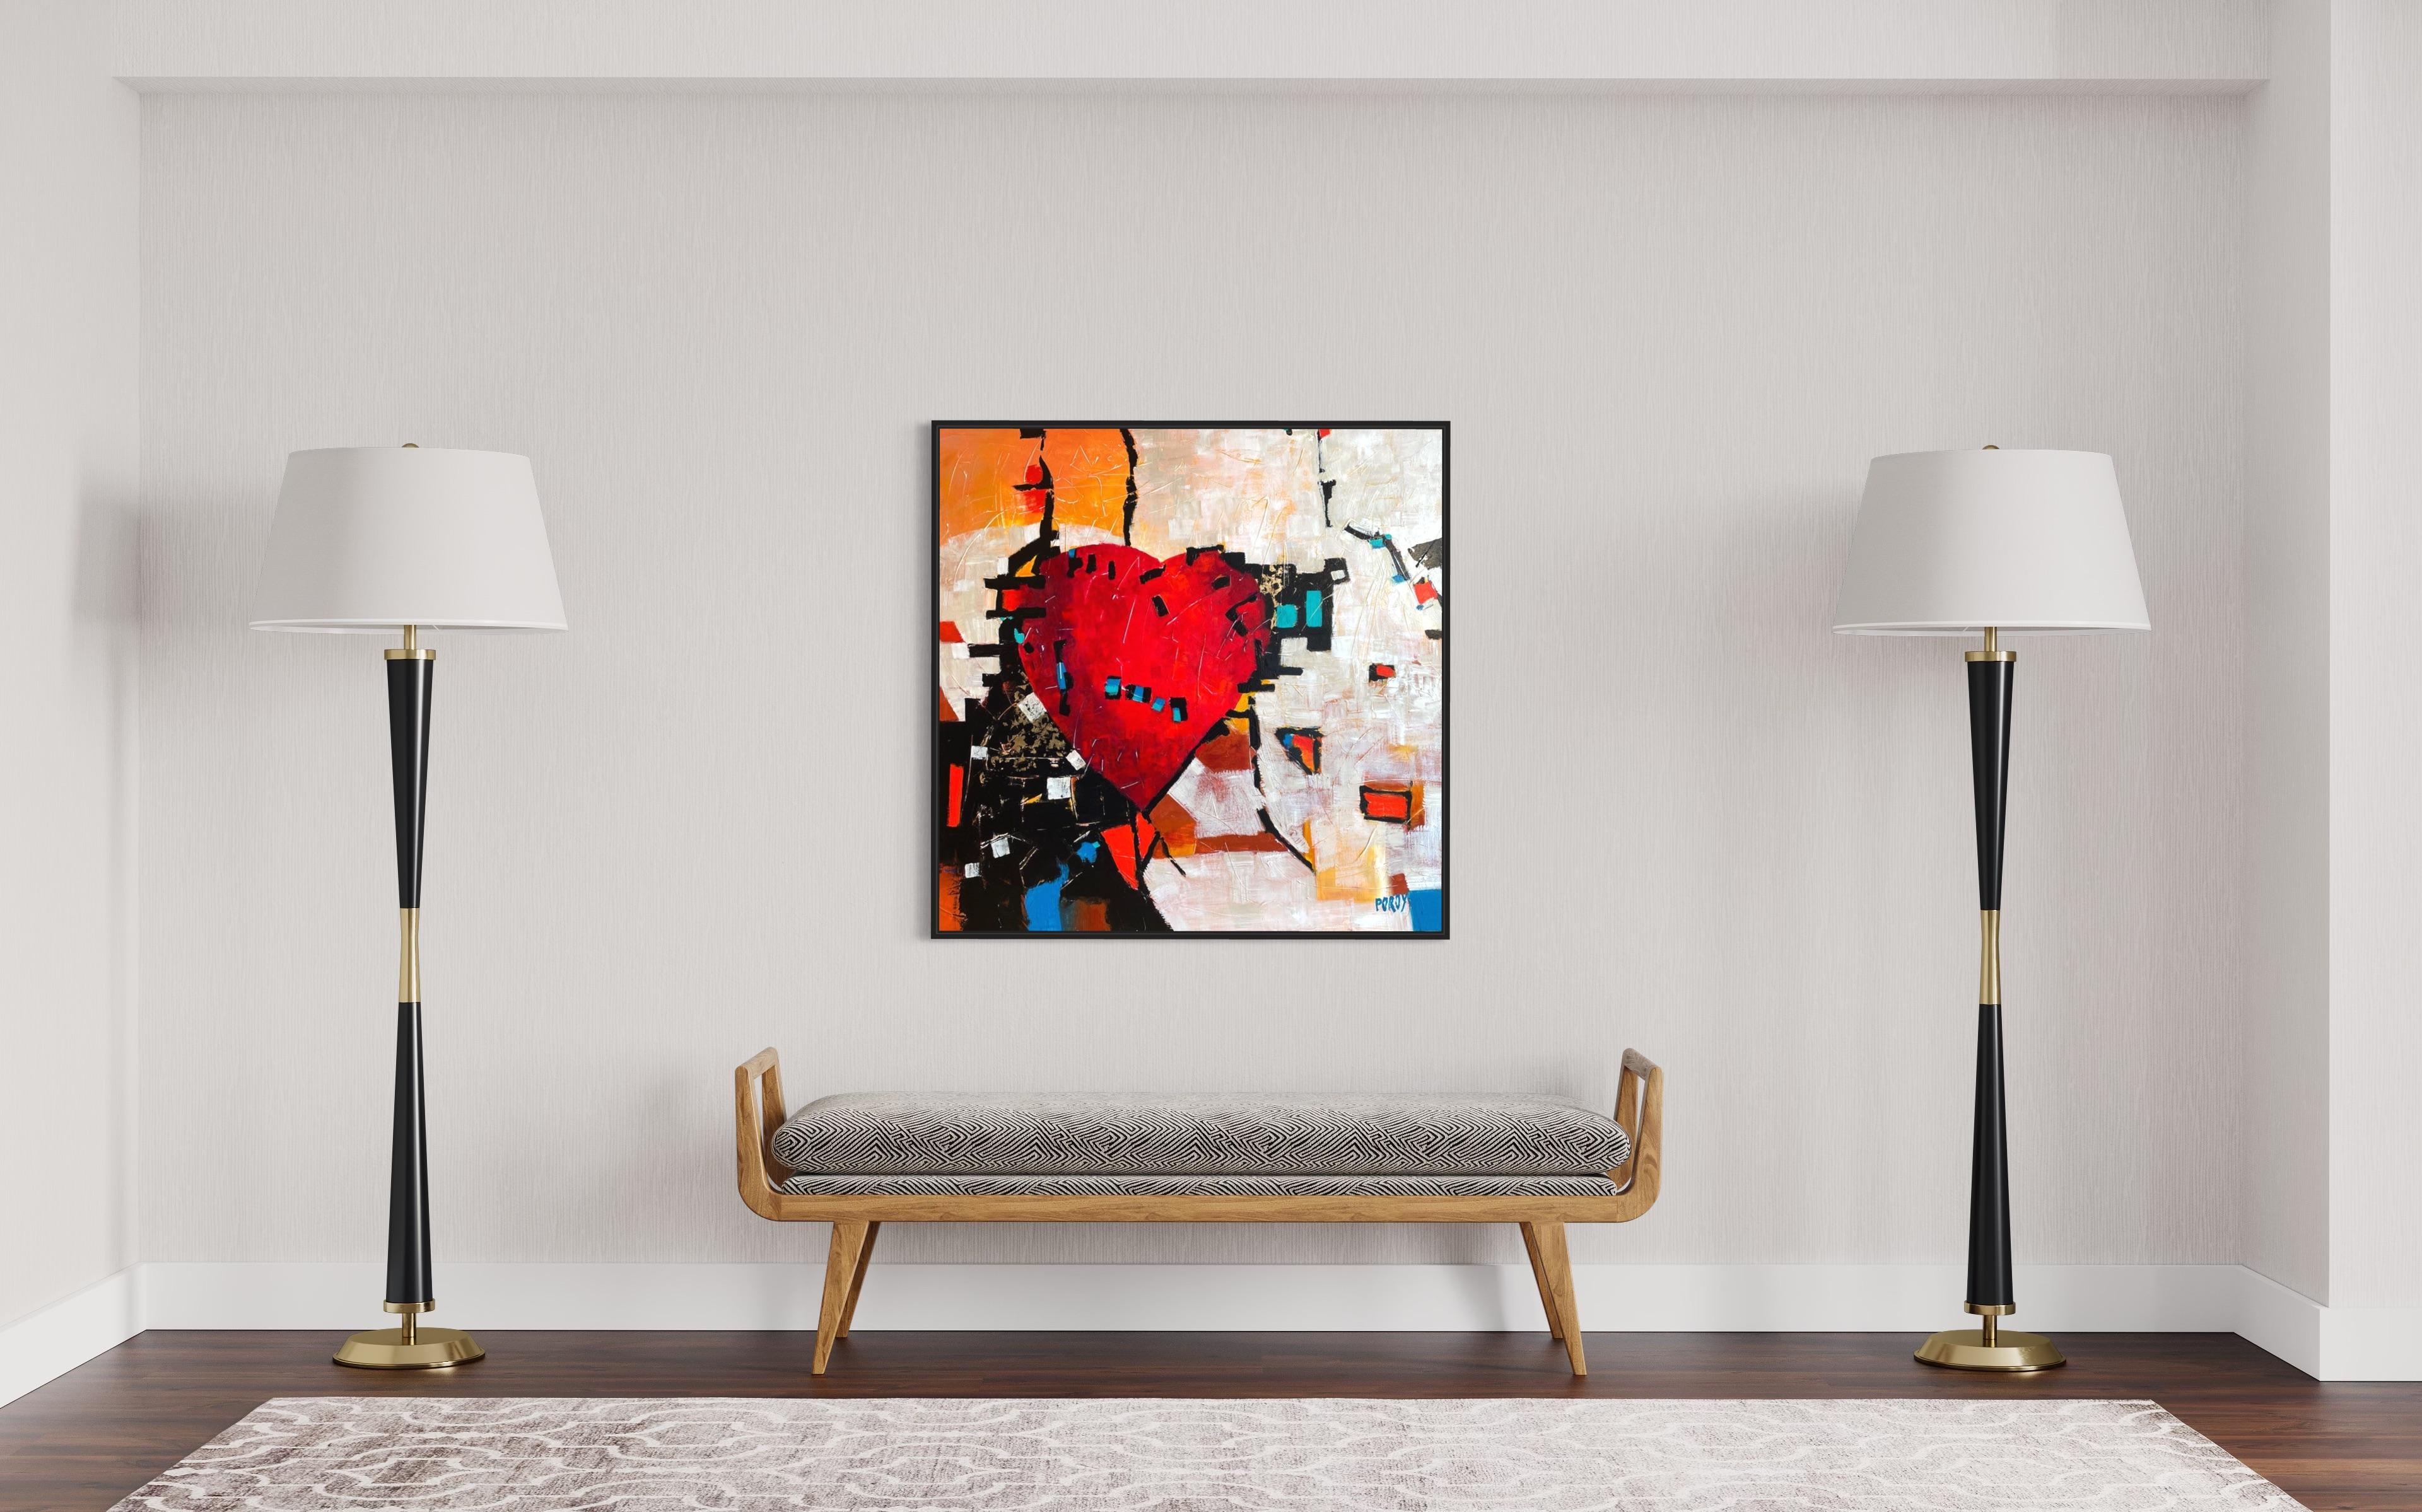 'Modern Home' - Bold Red Heart - Abstract Expressionist Mixed Media on Canvas - Painting by Maria Poroy